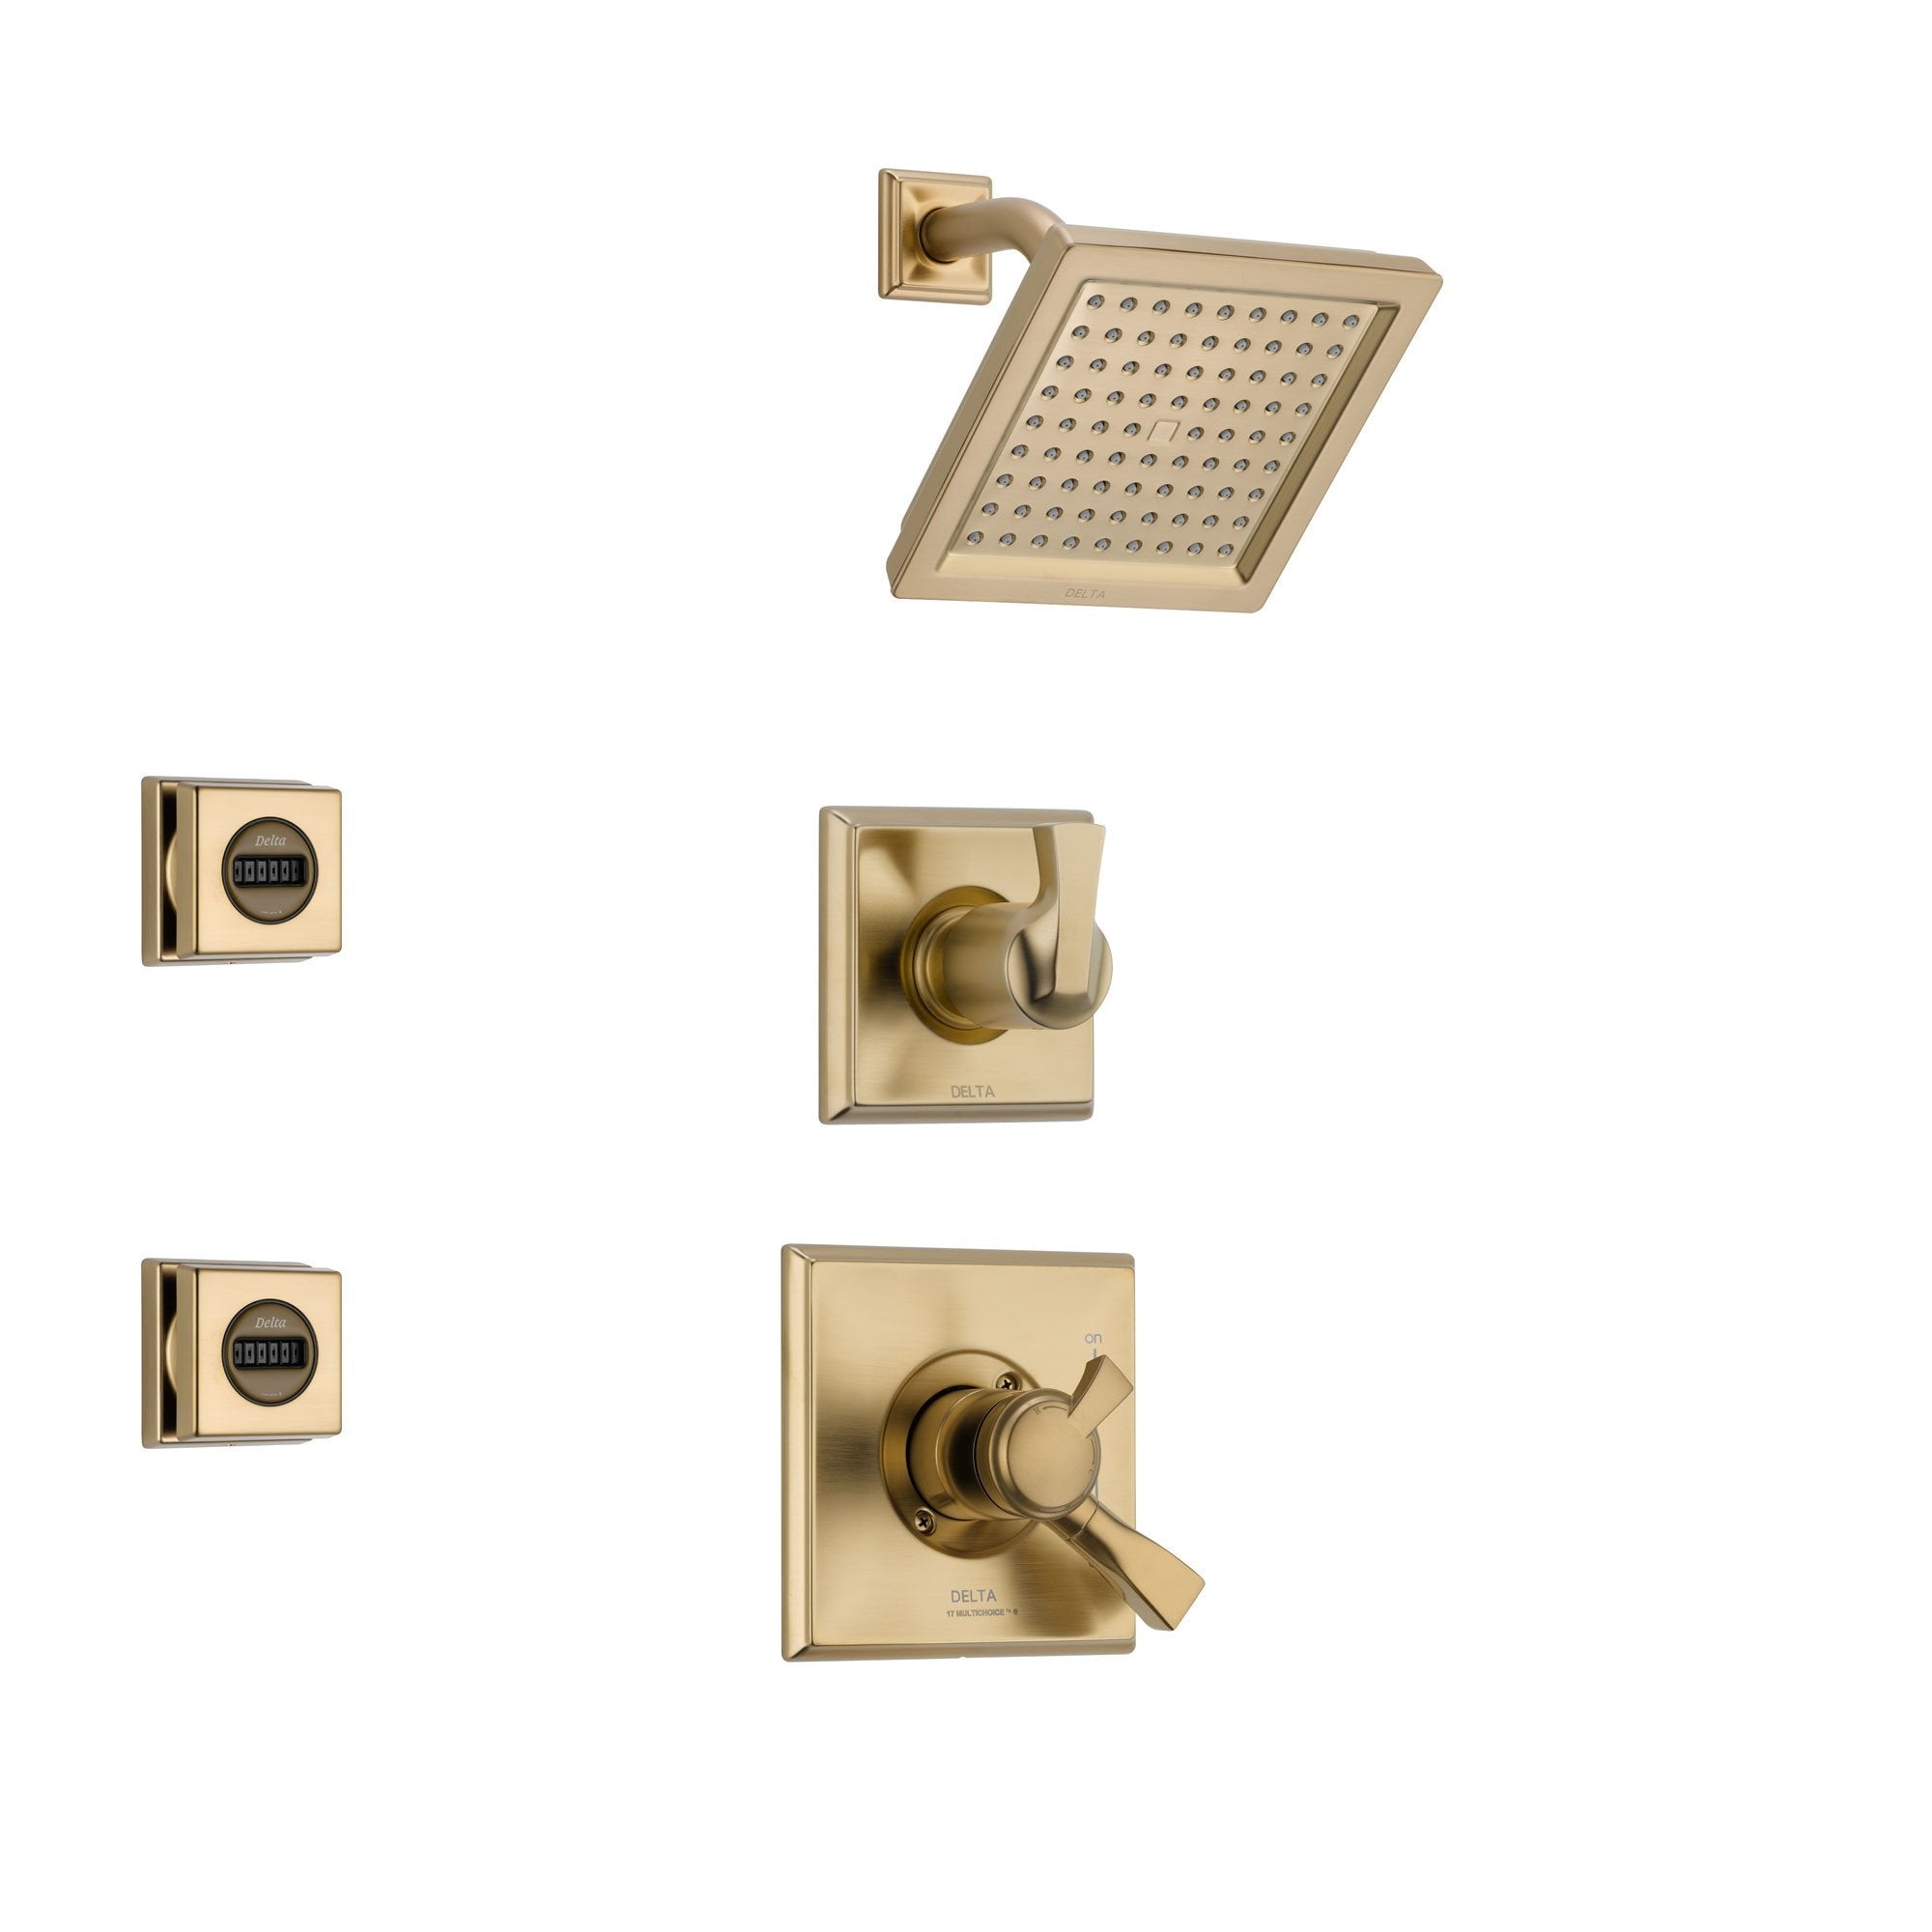 Delta Dryden Champagne Bronze Shower System with Dual Control Shower Handle, 3-setting Diverter, Modern Square Showerhead, and 2 Body Sprays SS175181CZ